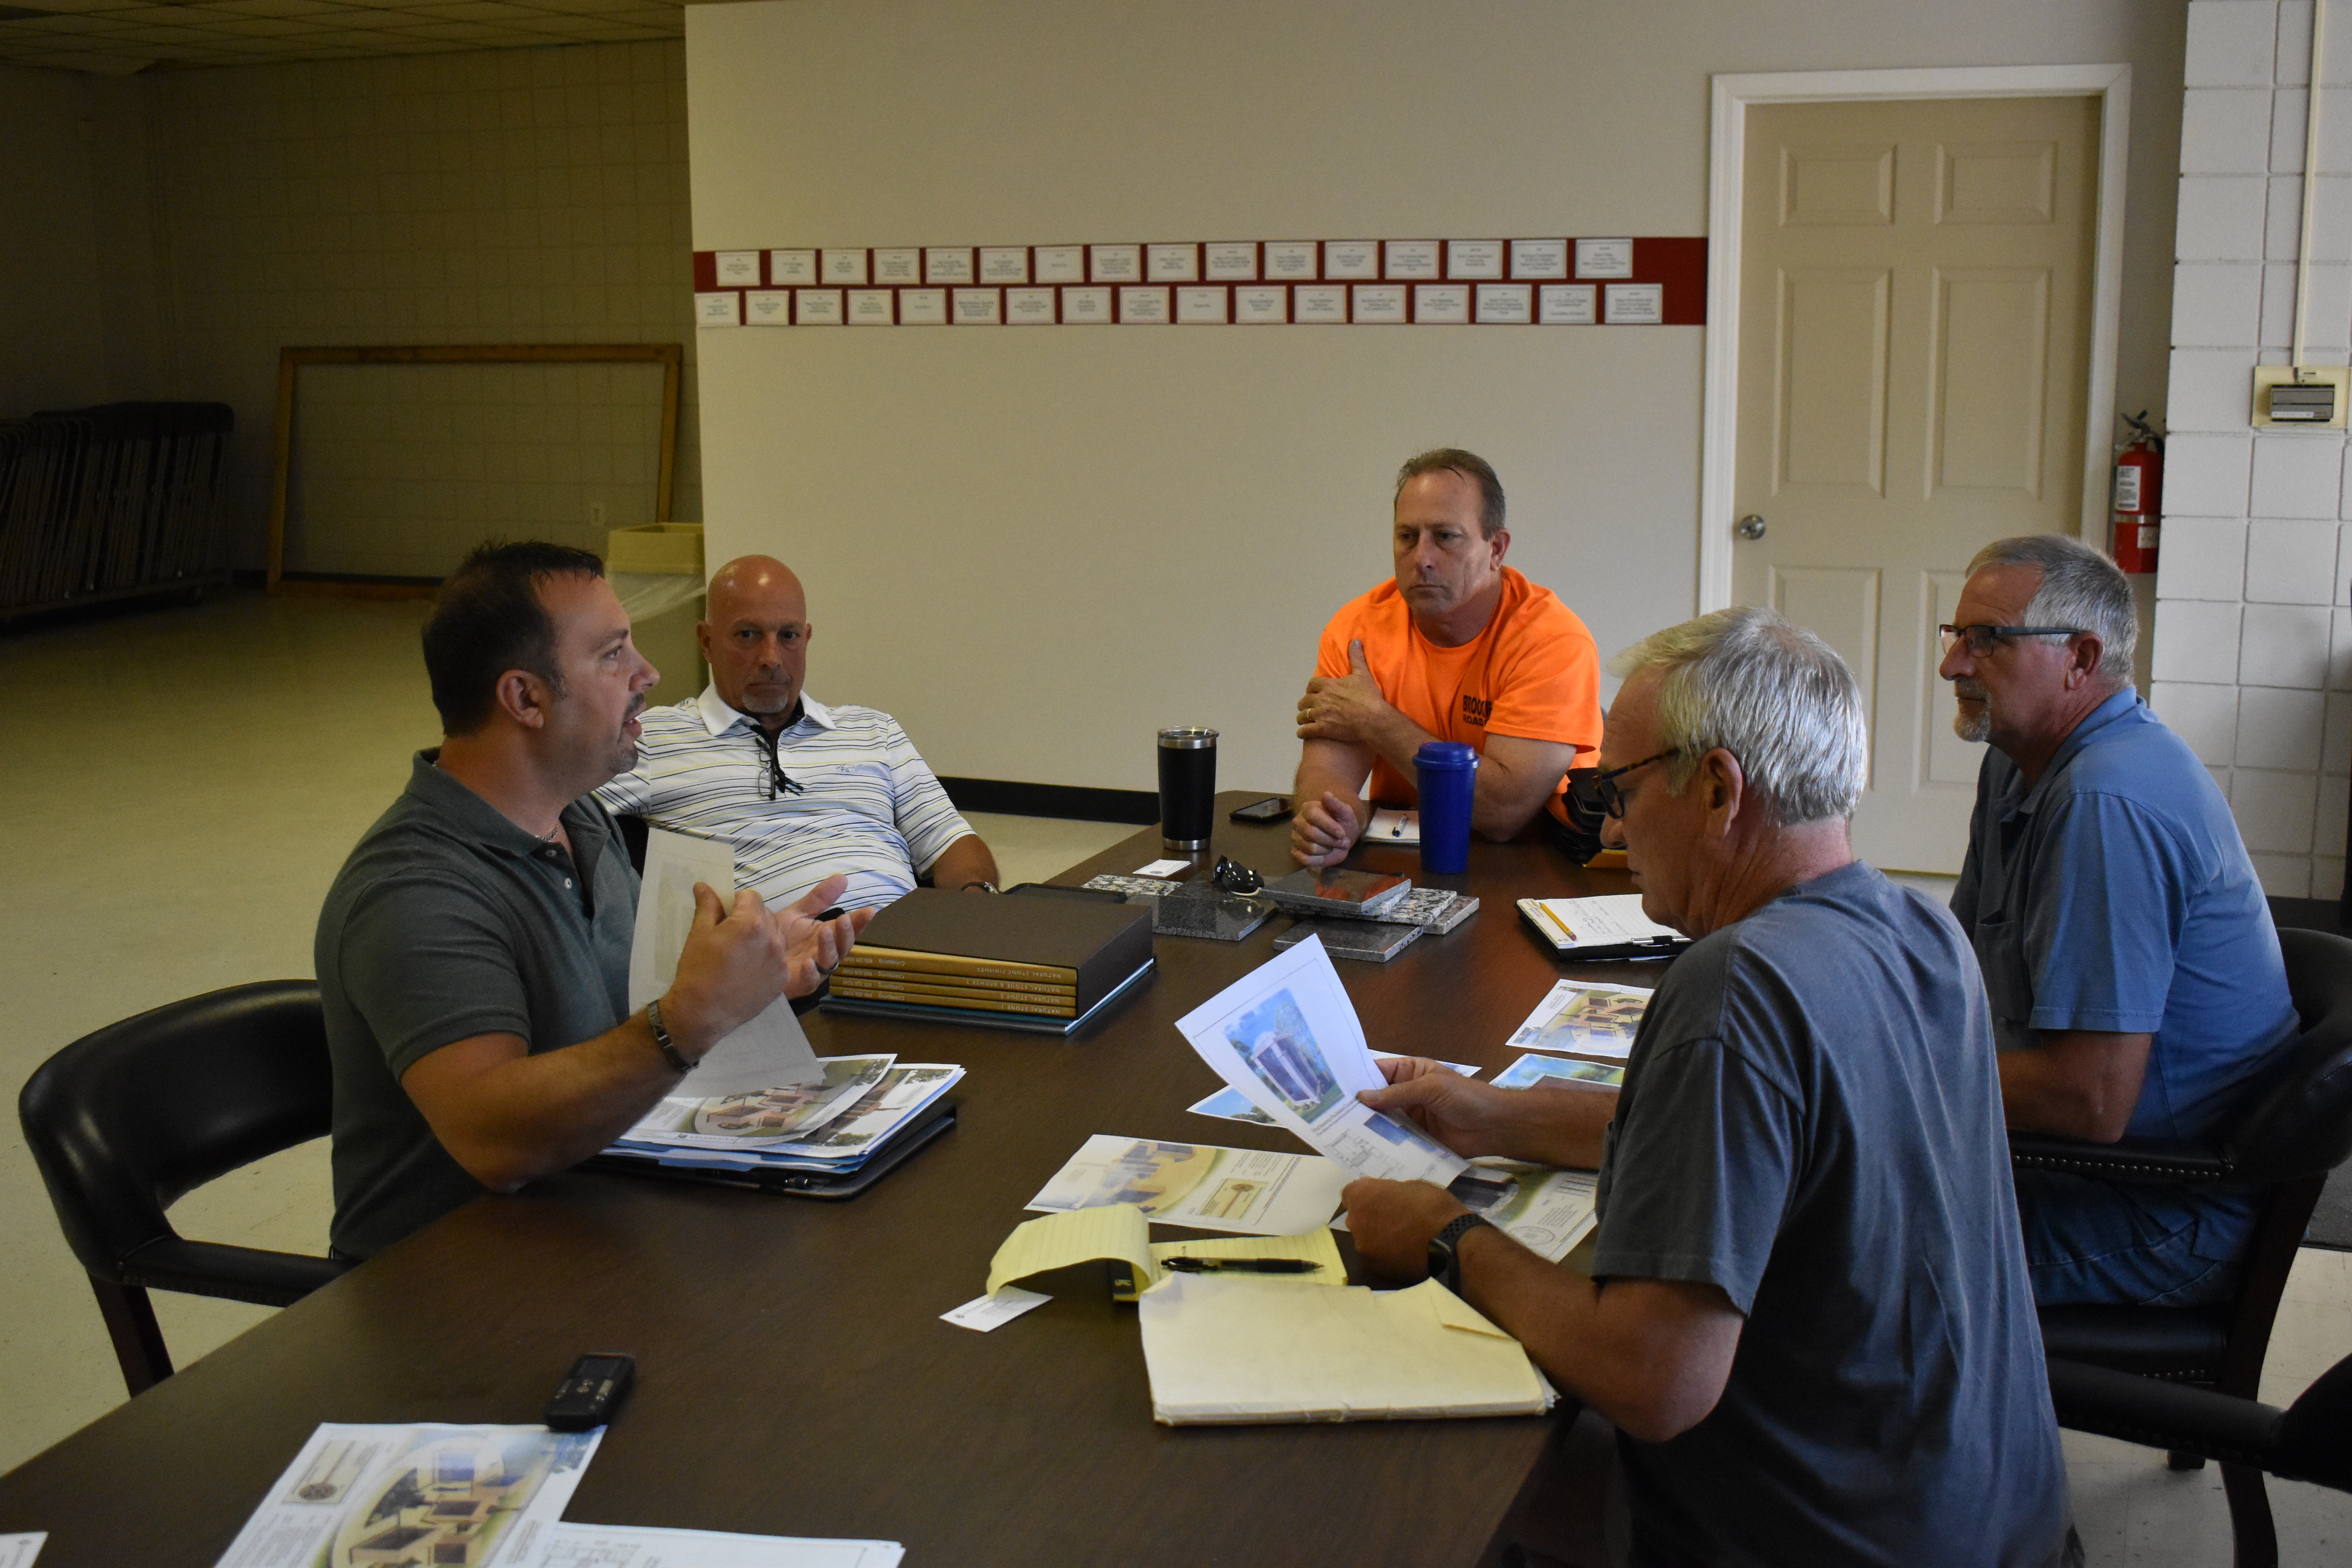 Dave England, left, of Coldspring USA, explains to Brookfield Township officials their options in choosing an columbarium, a mausoleum for cremated remains. Also shown are, from right, Trustees Ron Haun and Dan Suttles, Cemetery Sexton Jaime Fredenburg and consultant Jim DeChristefero.